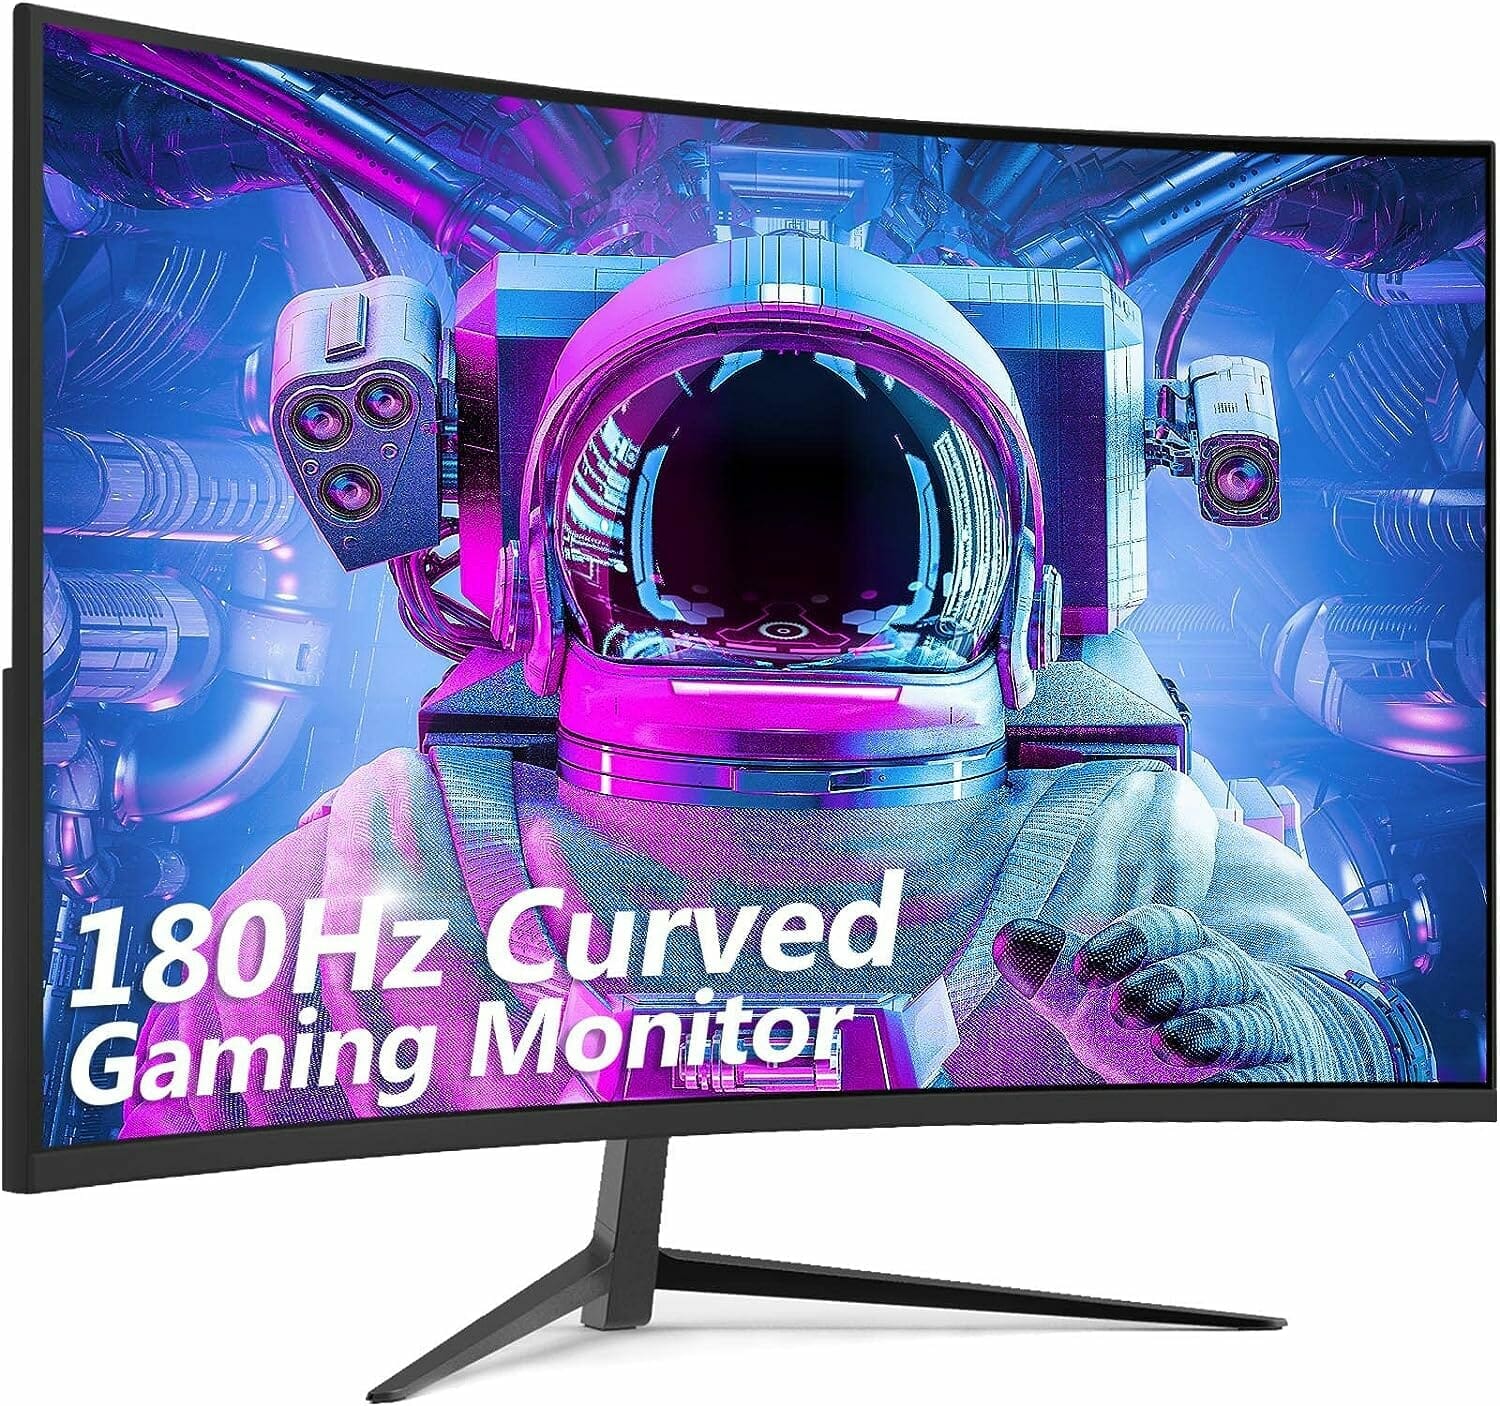 Z-Edge 24 Inch Curved Gaming Monitor Full HD 180Hz/165Hz Review